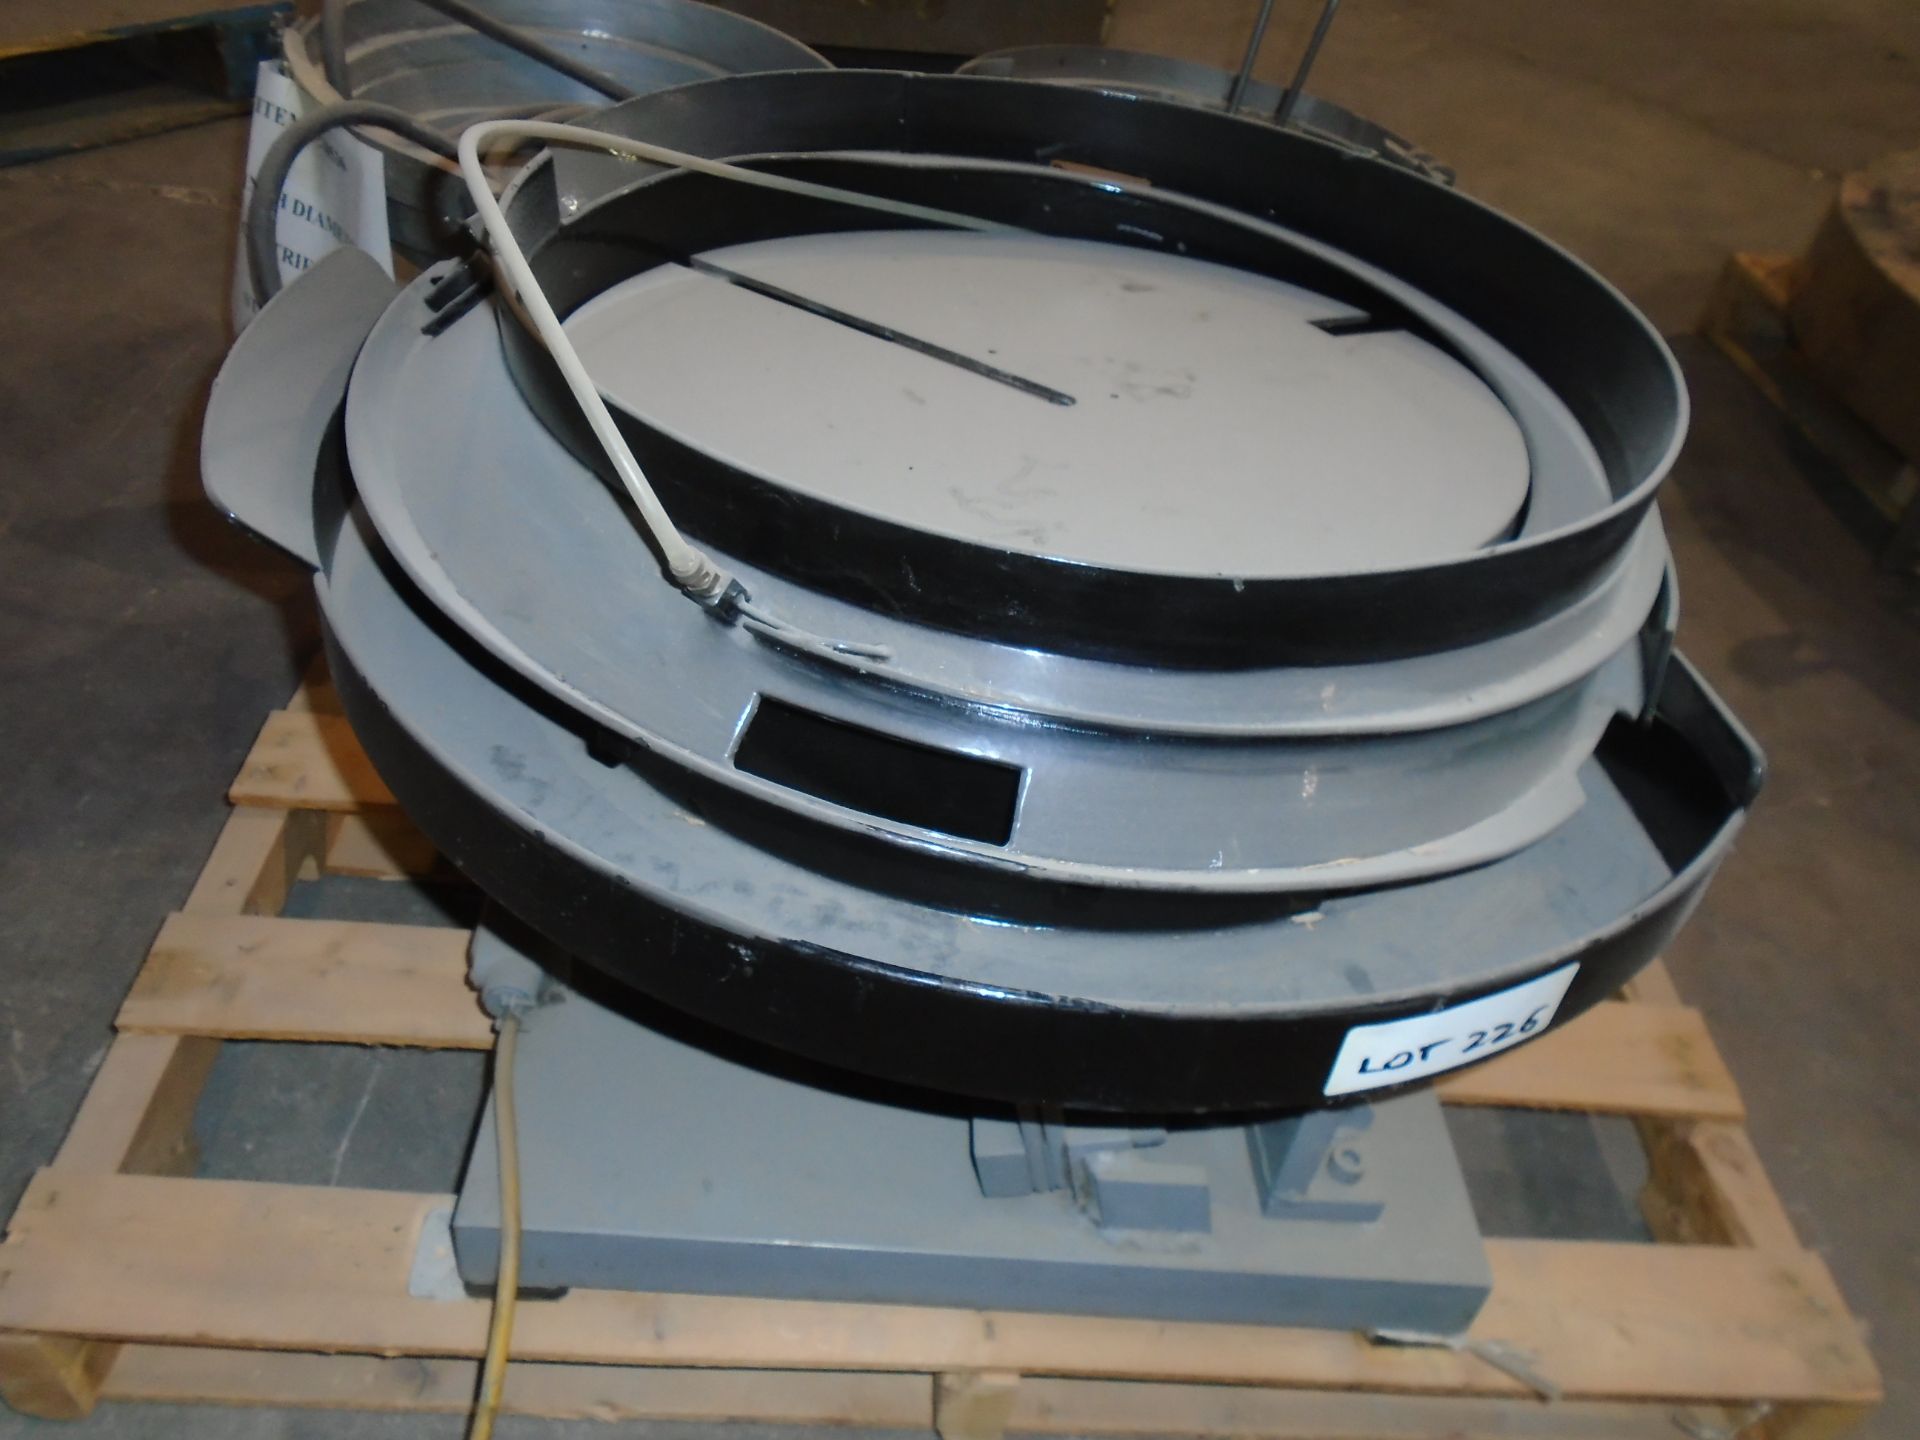 22" DIAMETER PRECISION FEEDERS VIBRATORY PARTS FEEDER. S/N 1709.120V LOAD OUT FEE:5